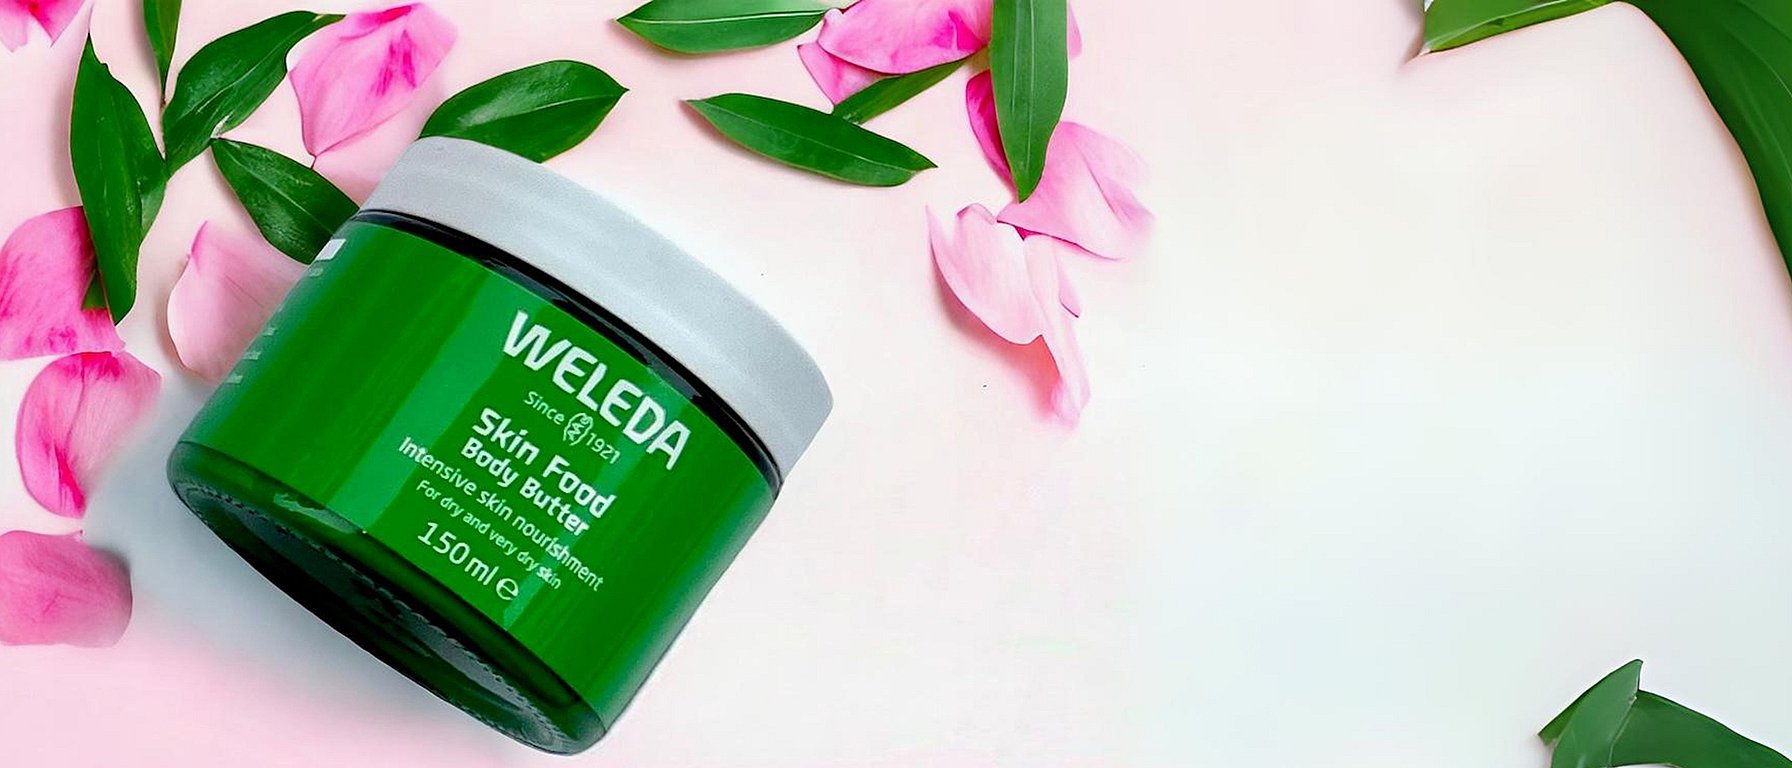 Spend over $120 and get a free Skin Food Body Butter